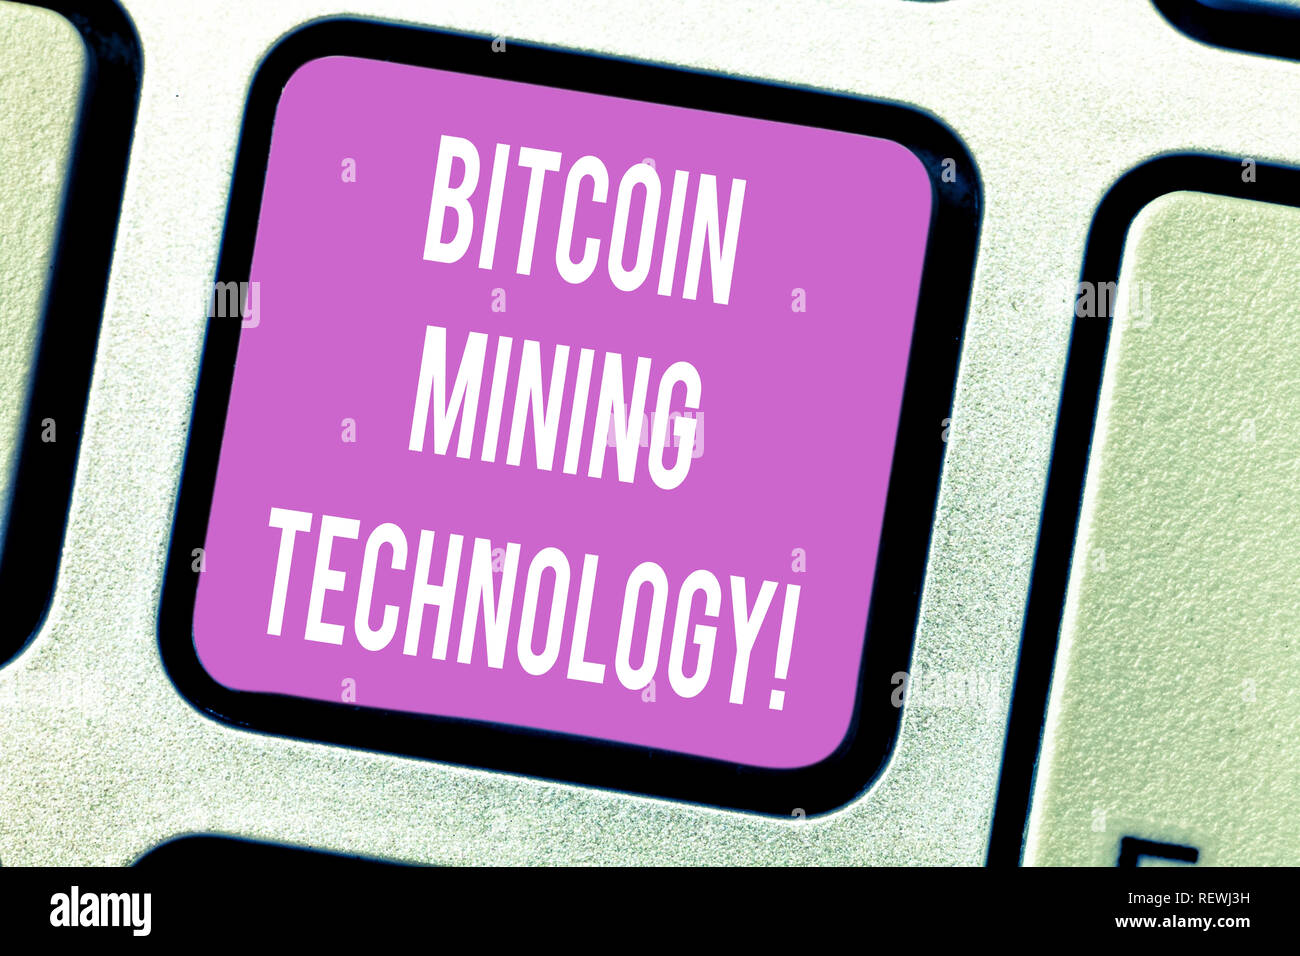 Handwriting Text Bitcoin Mining Technology Concept Meaning Trades - 